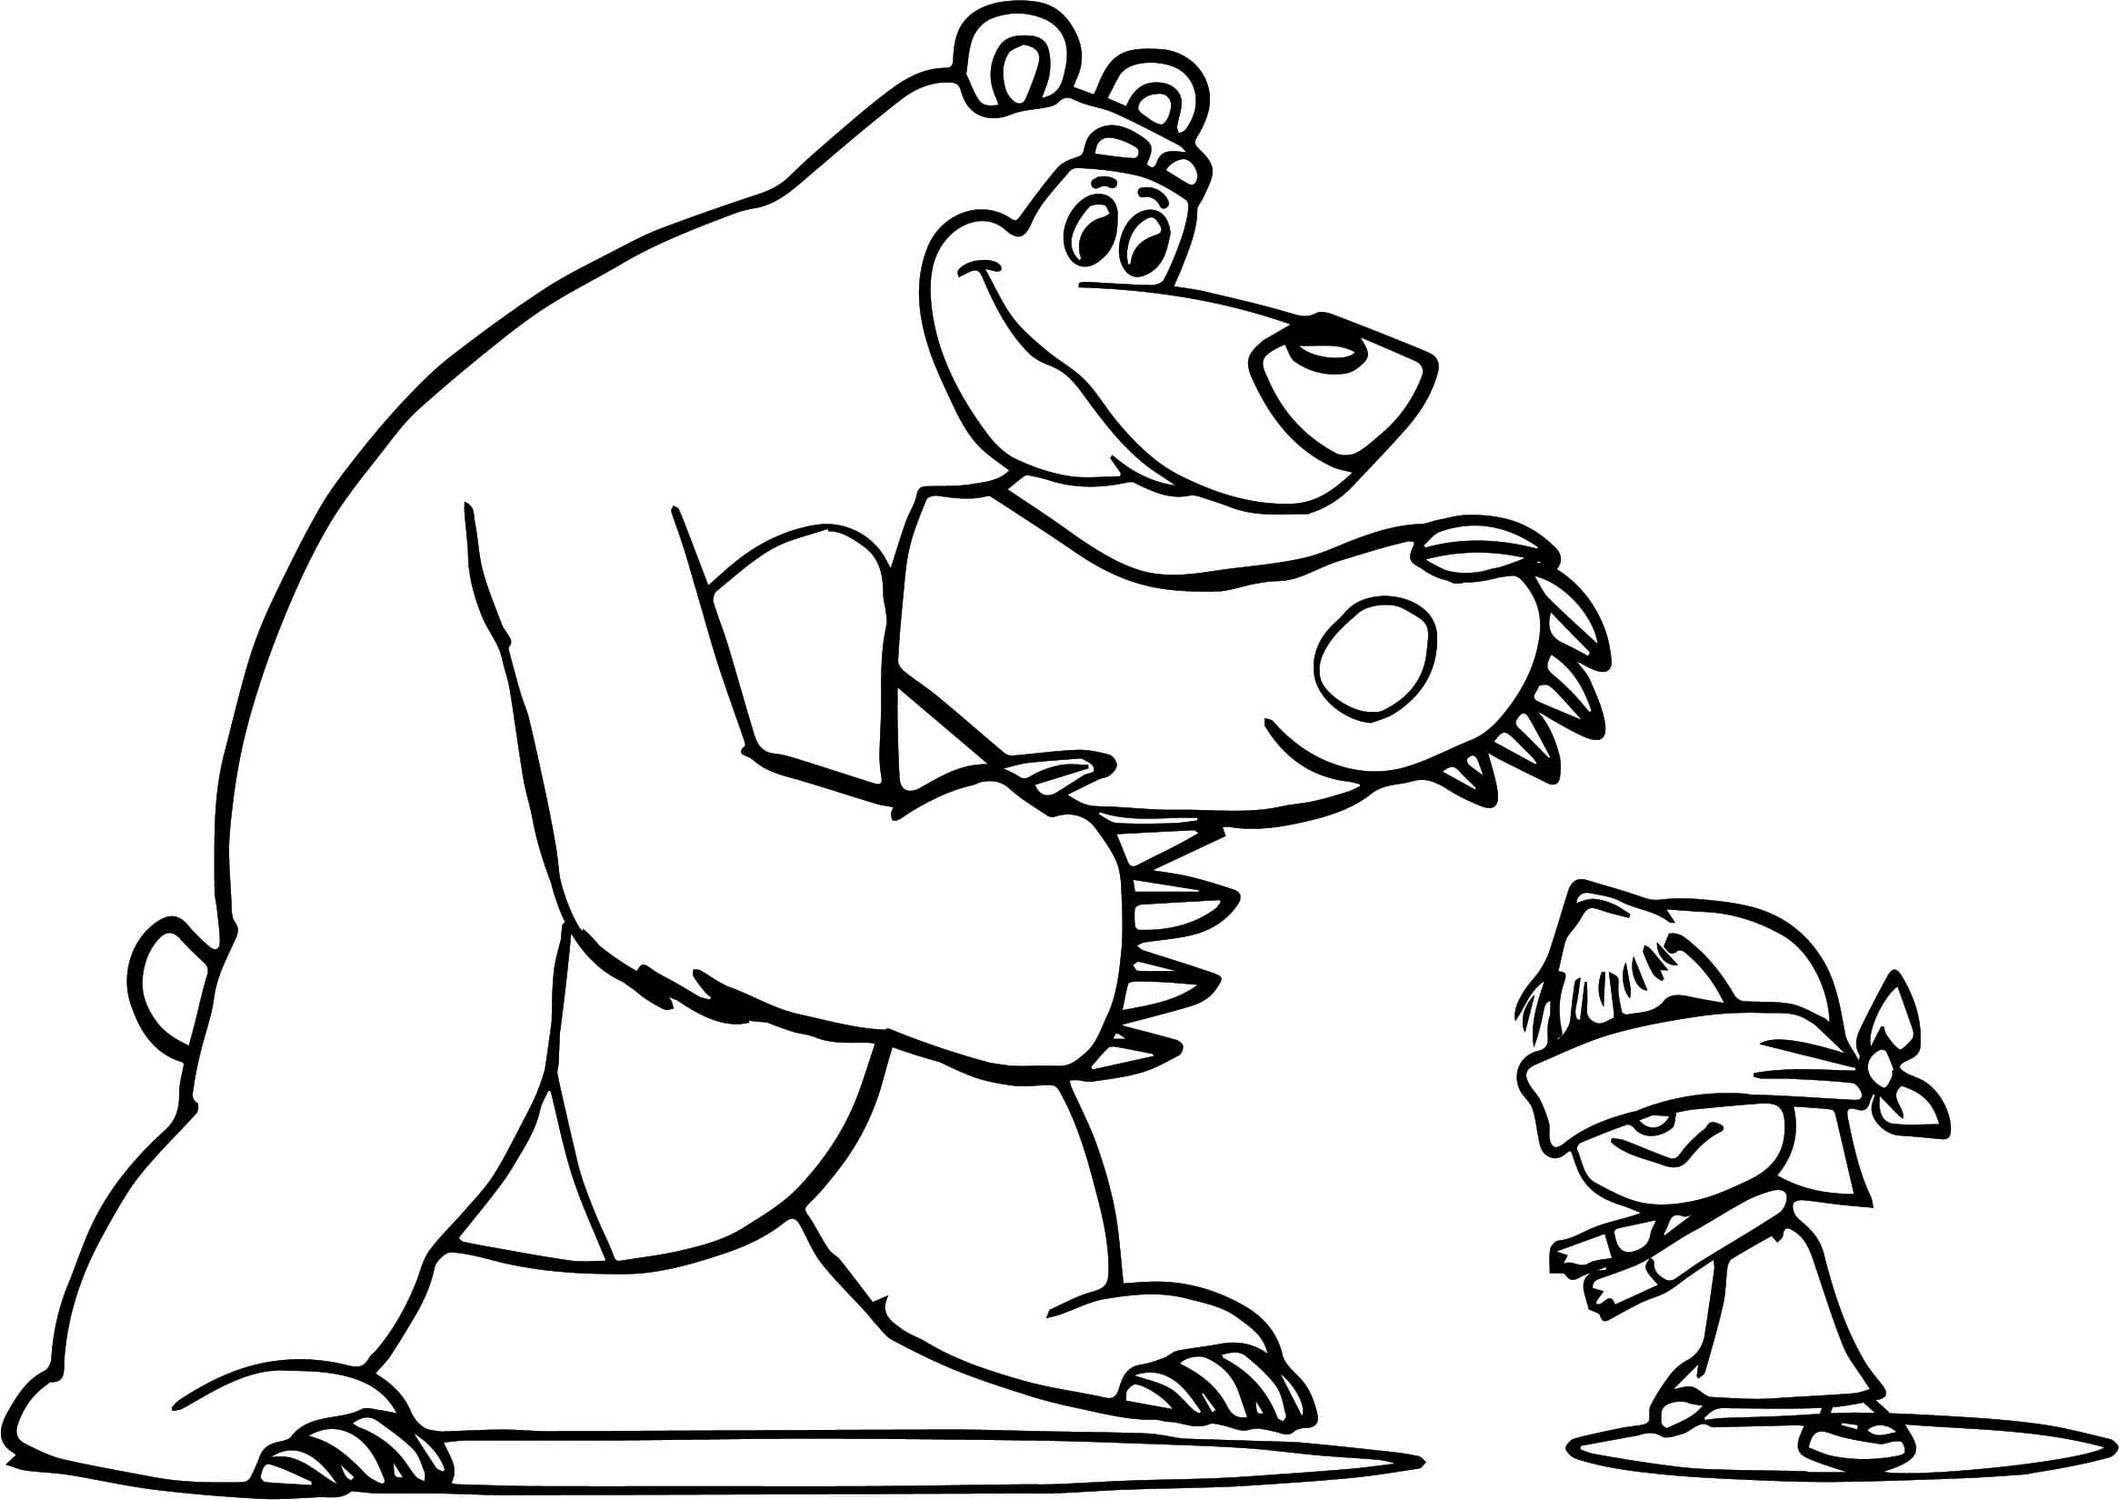 Drawing 32 of Masha and the Bear to print and color